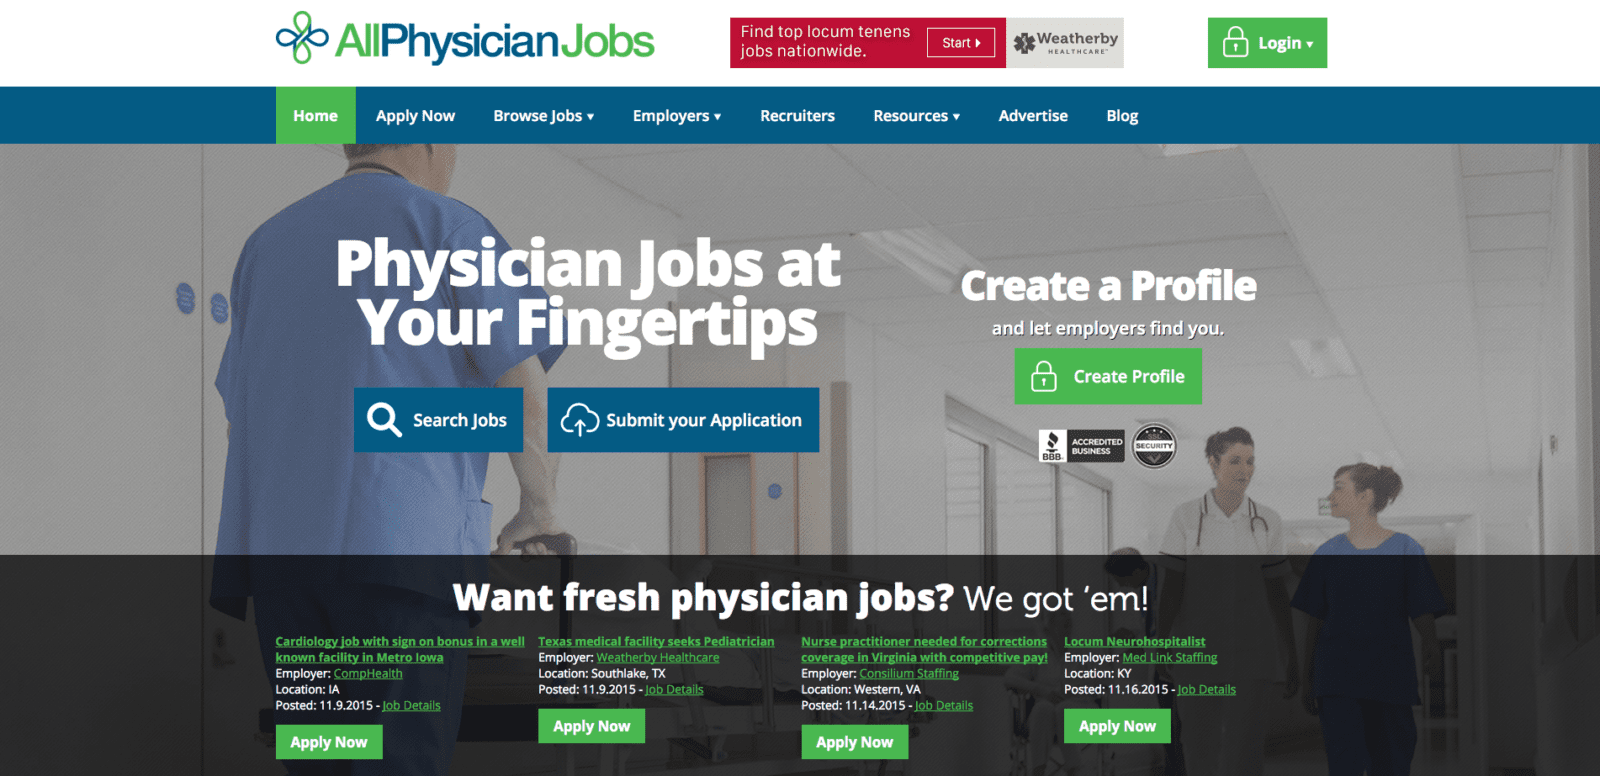 allphysicianjobs site 5